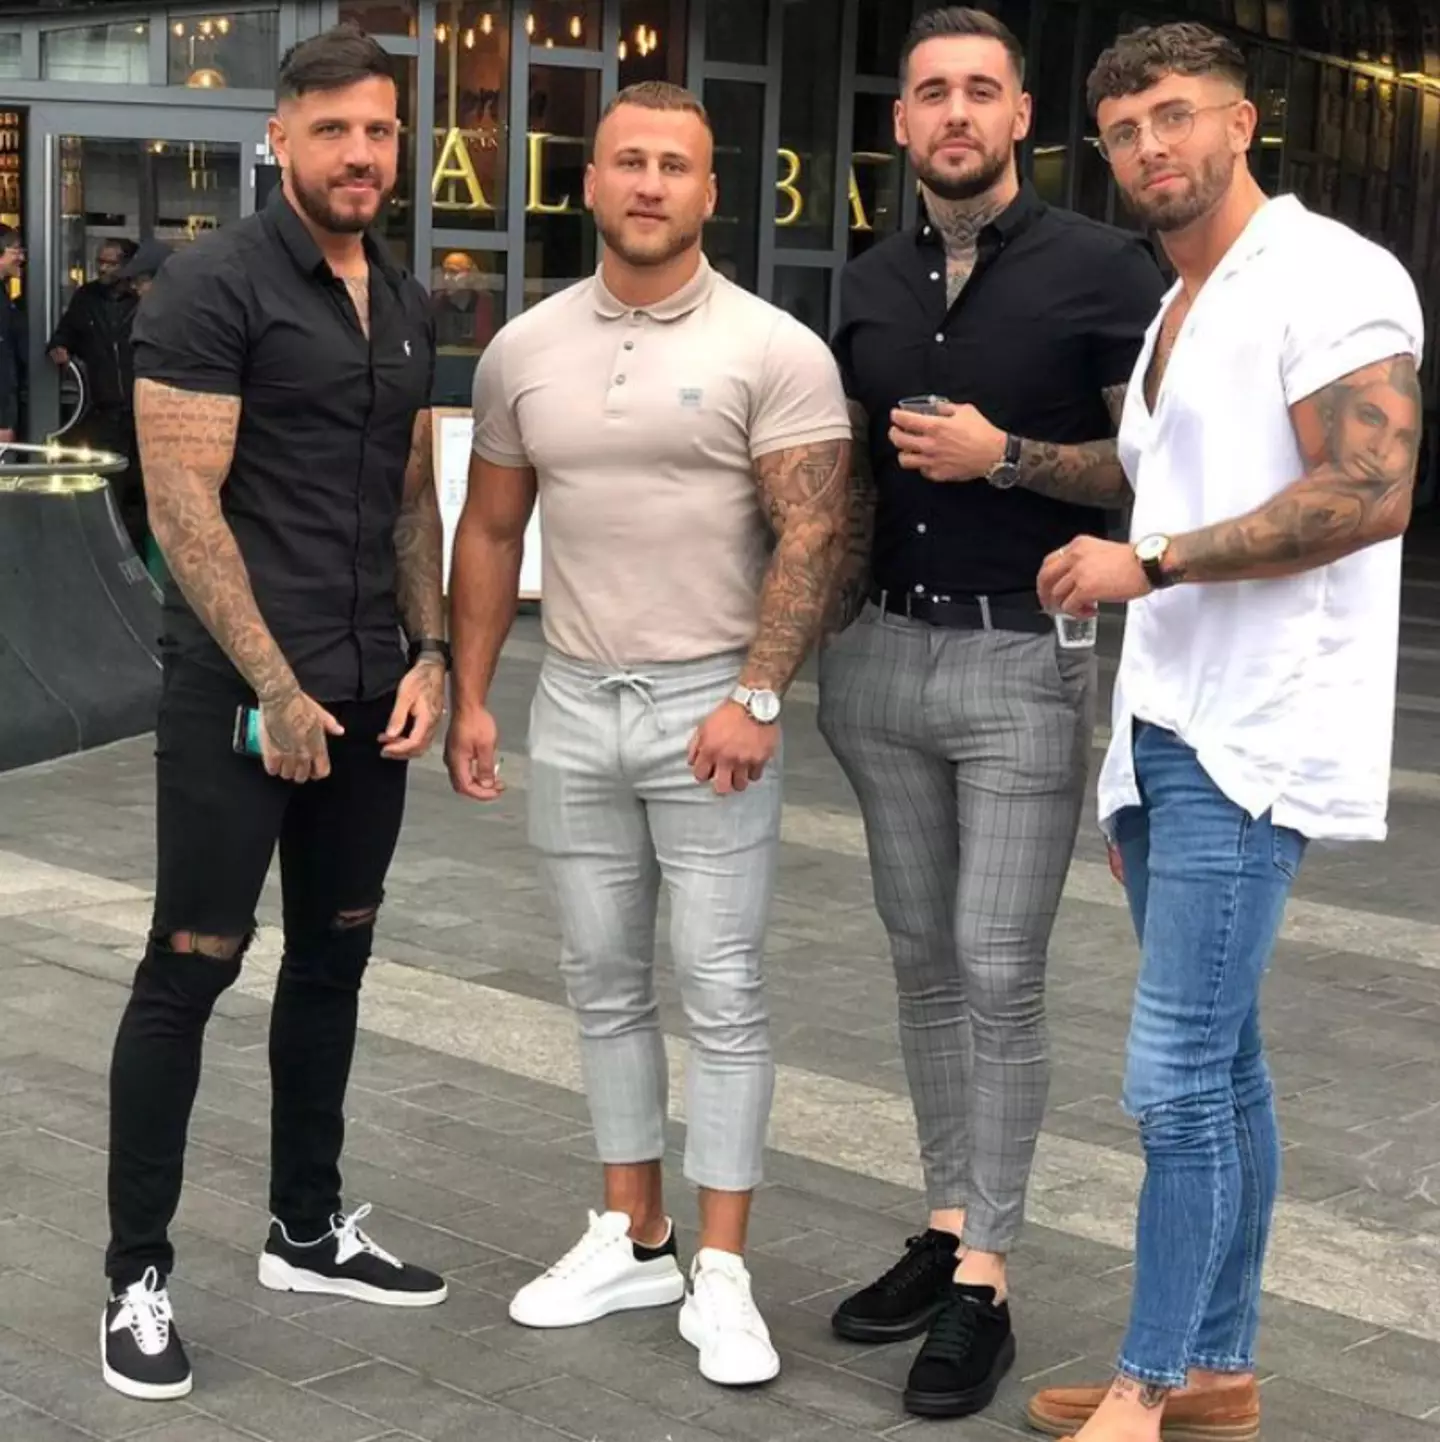 The moment Four Lads In Jeans was created. Instagram/ fourladsinjeans